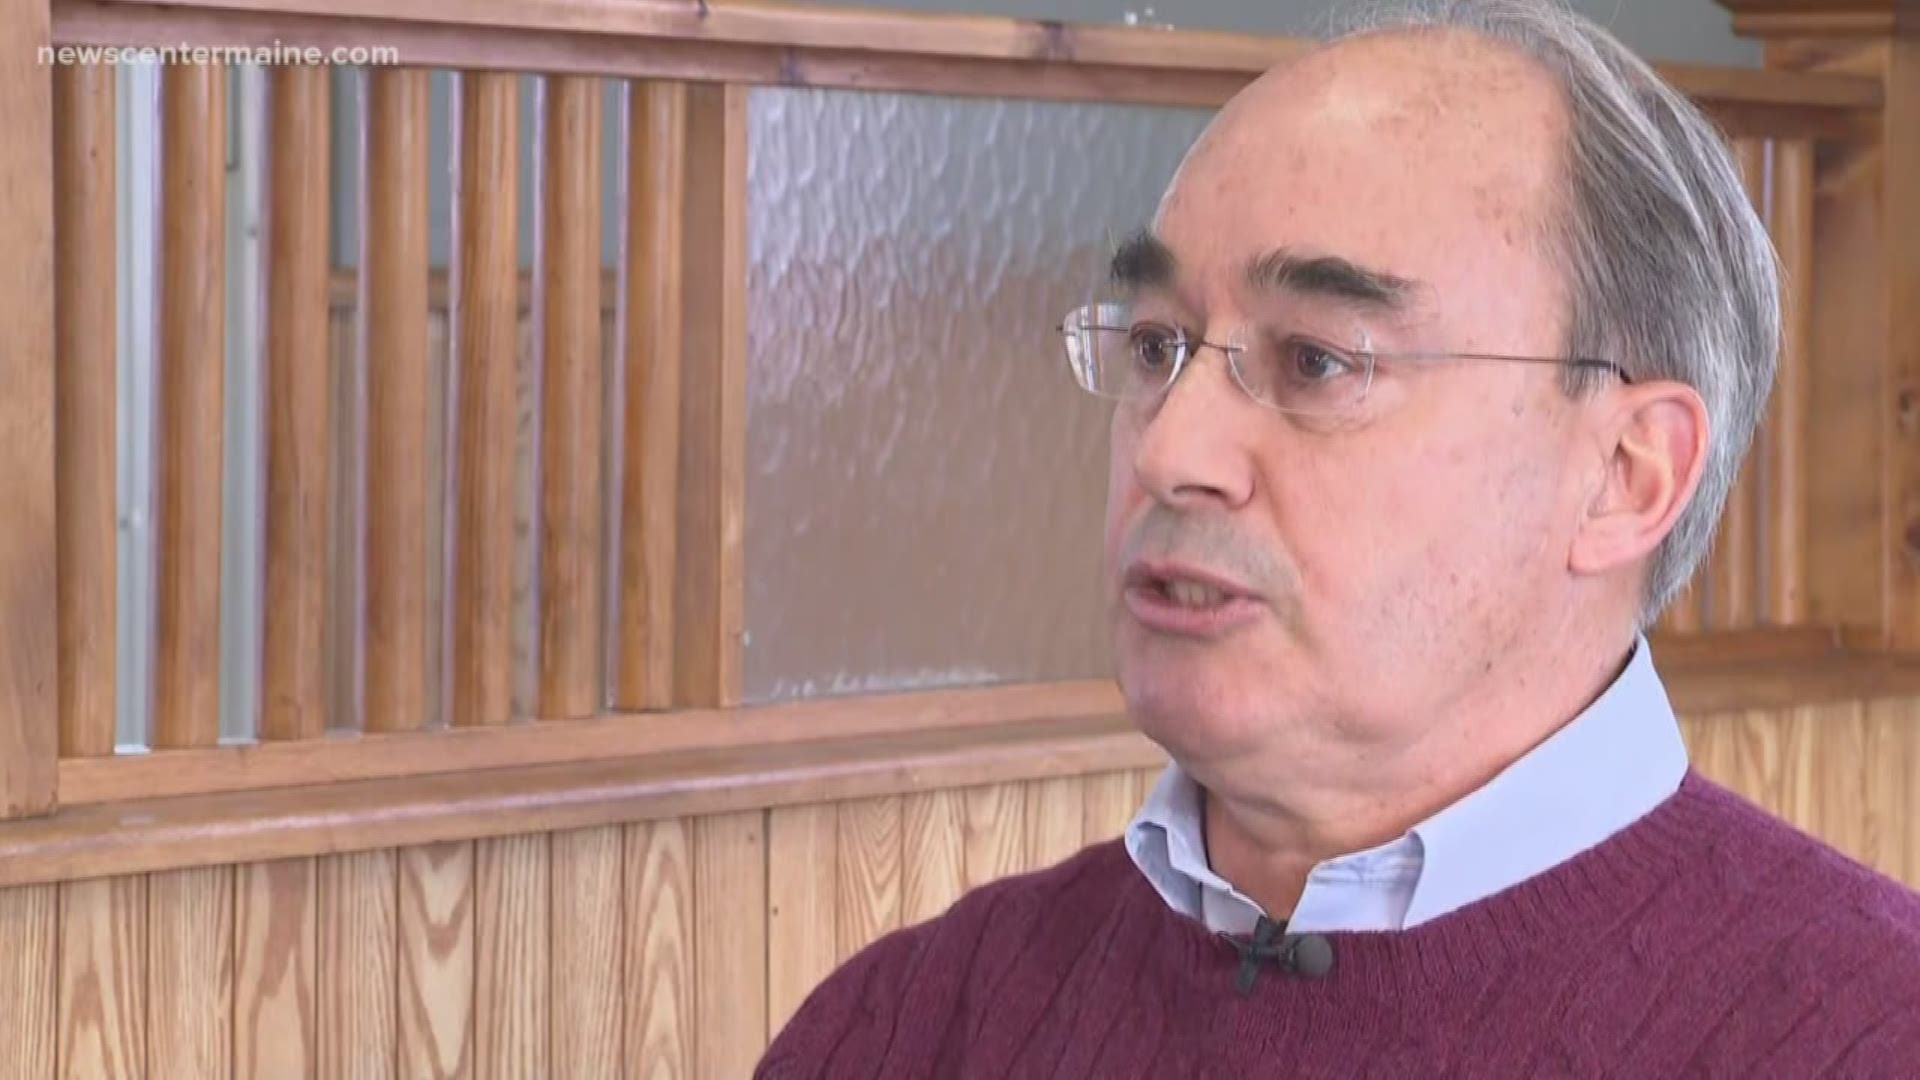 Bruce Poliquin discusses the government shutdown and his loss to Jared Golden in the race for Maine's second district representative seat last November.